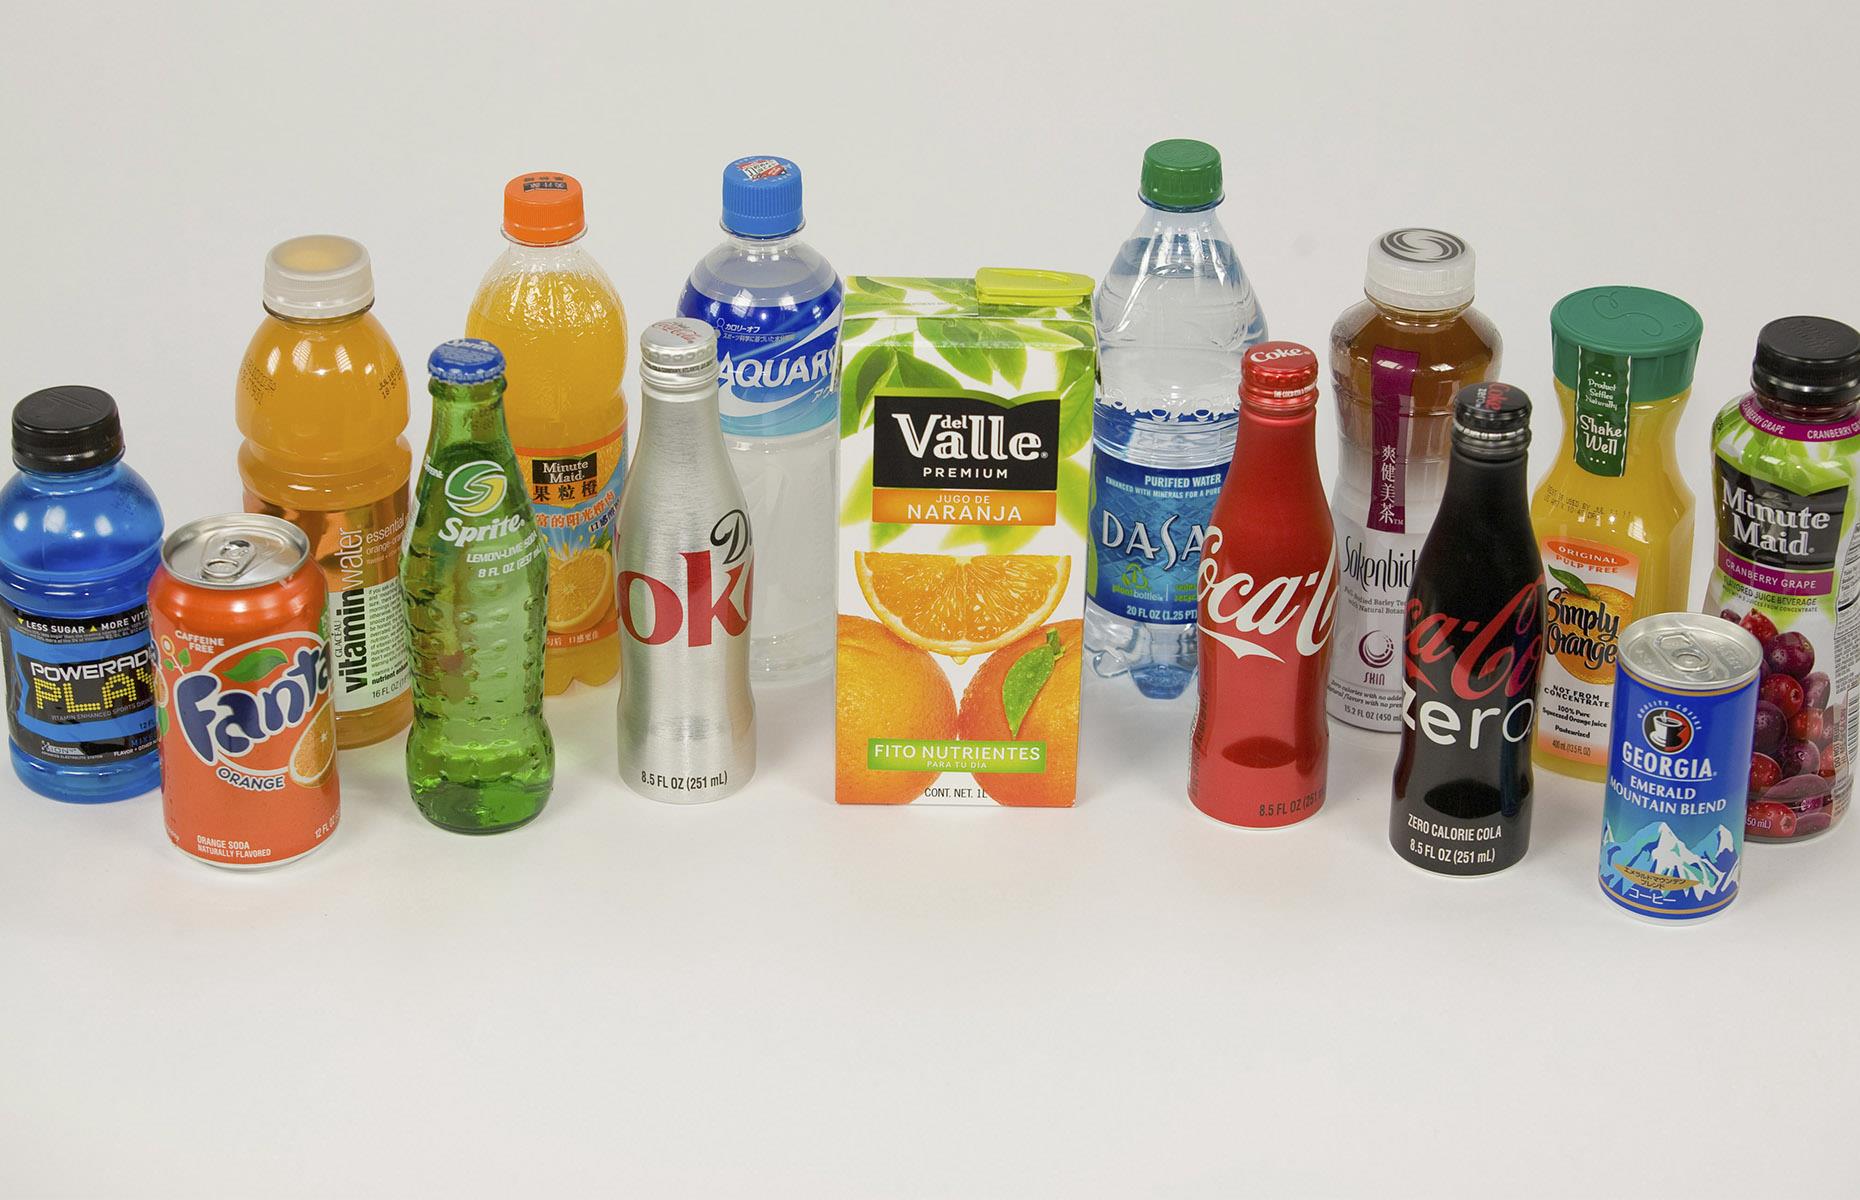 The Coca-Cola Company doesn't only sell Coke, it has around 4,000 different drinks across 500 brands. In fact, Coca-Cola makes so many products, if you tried one product from its portfolio every day, it would take you just under 11 years to try them all.